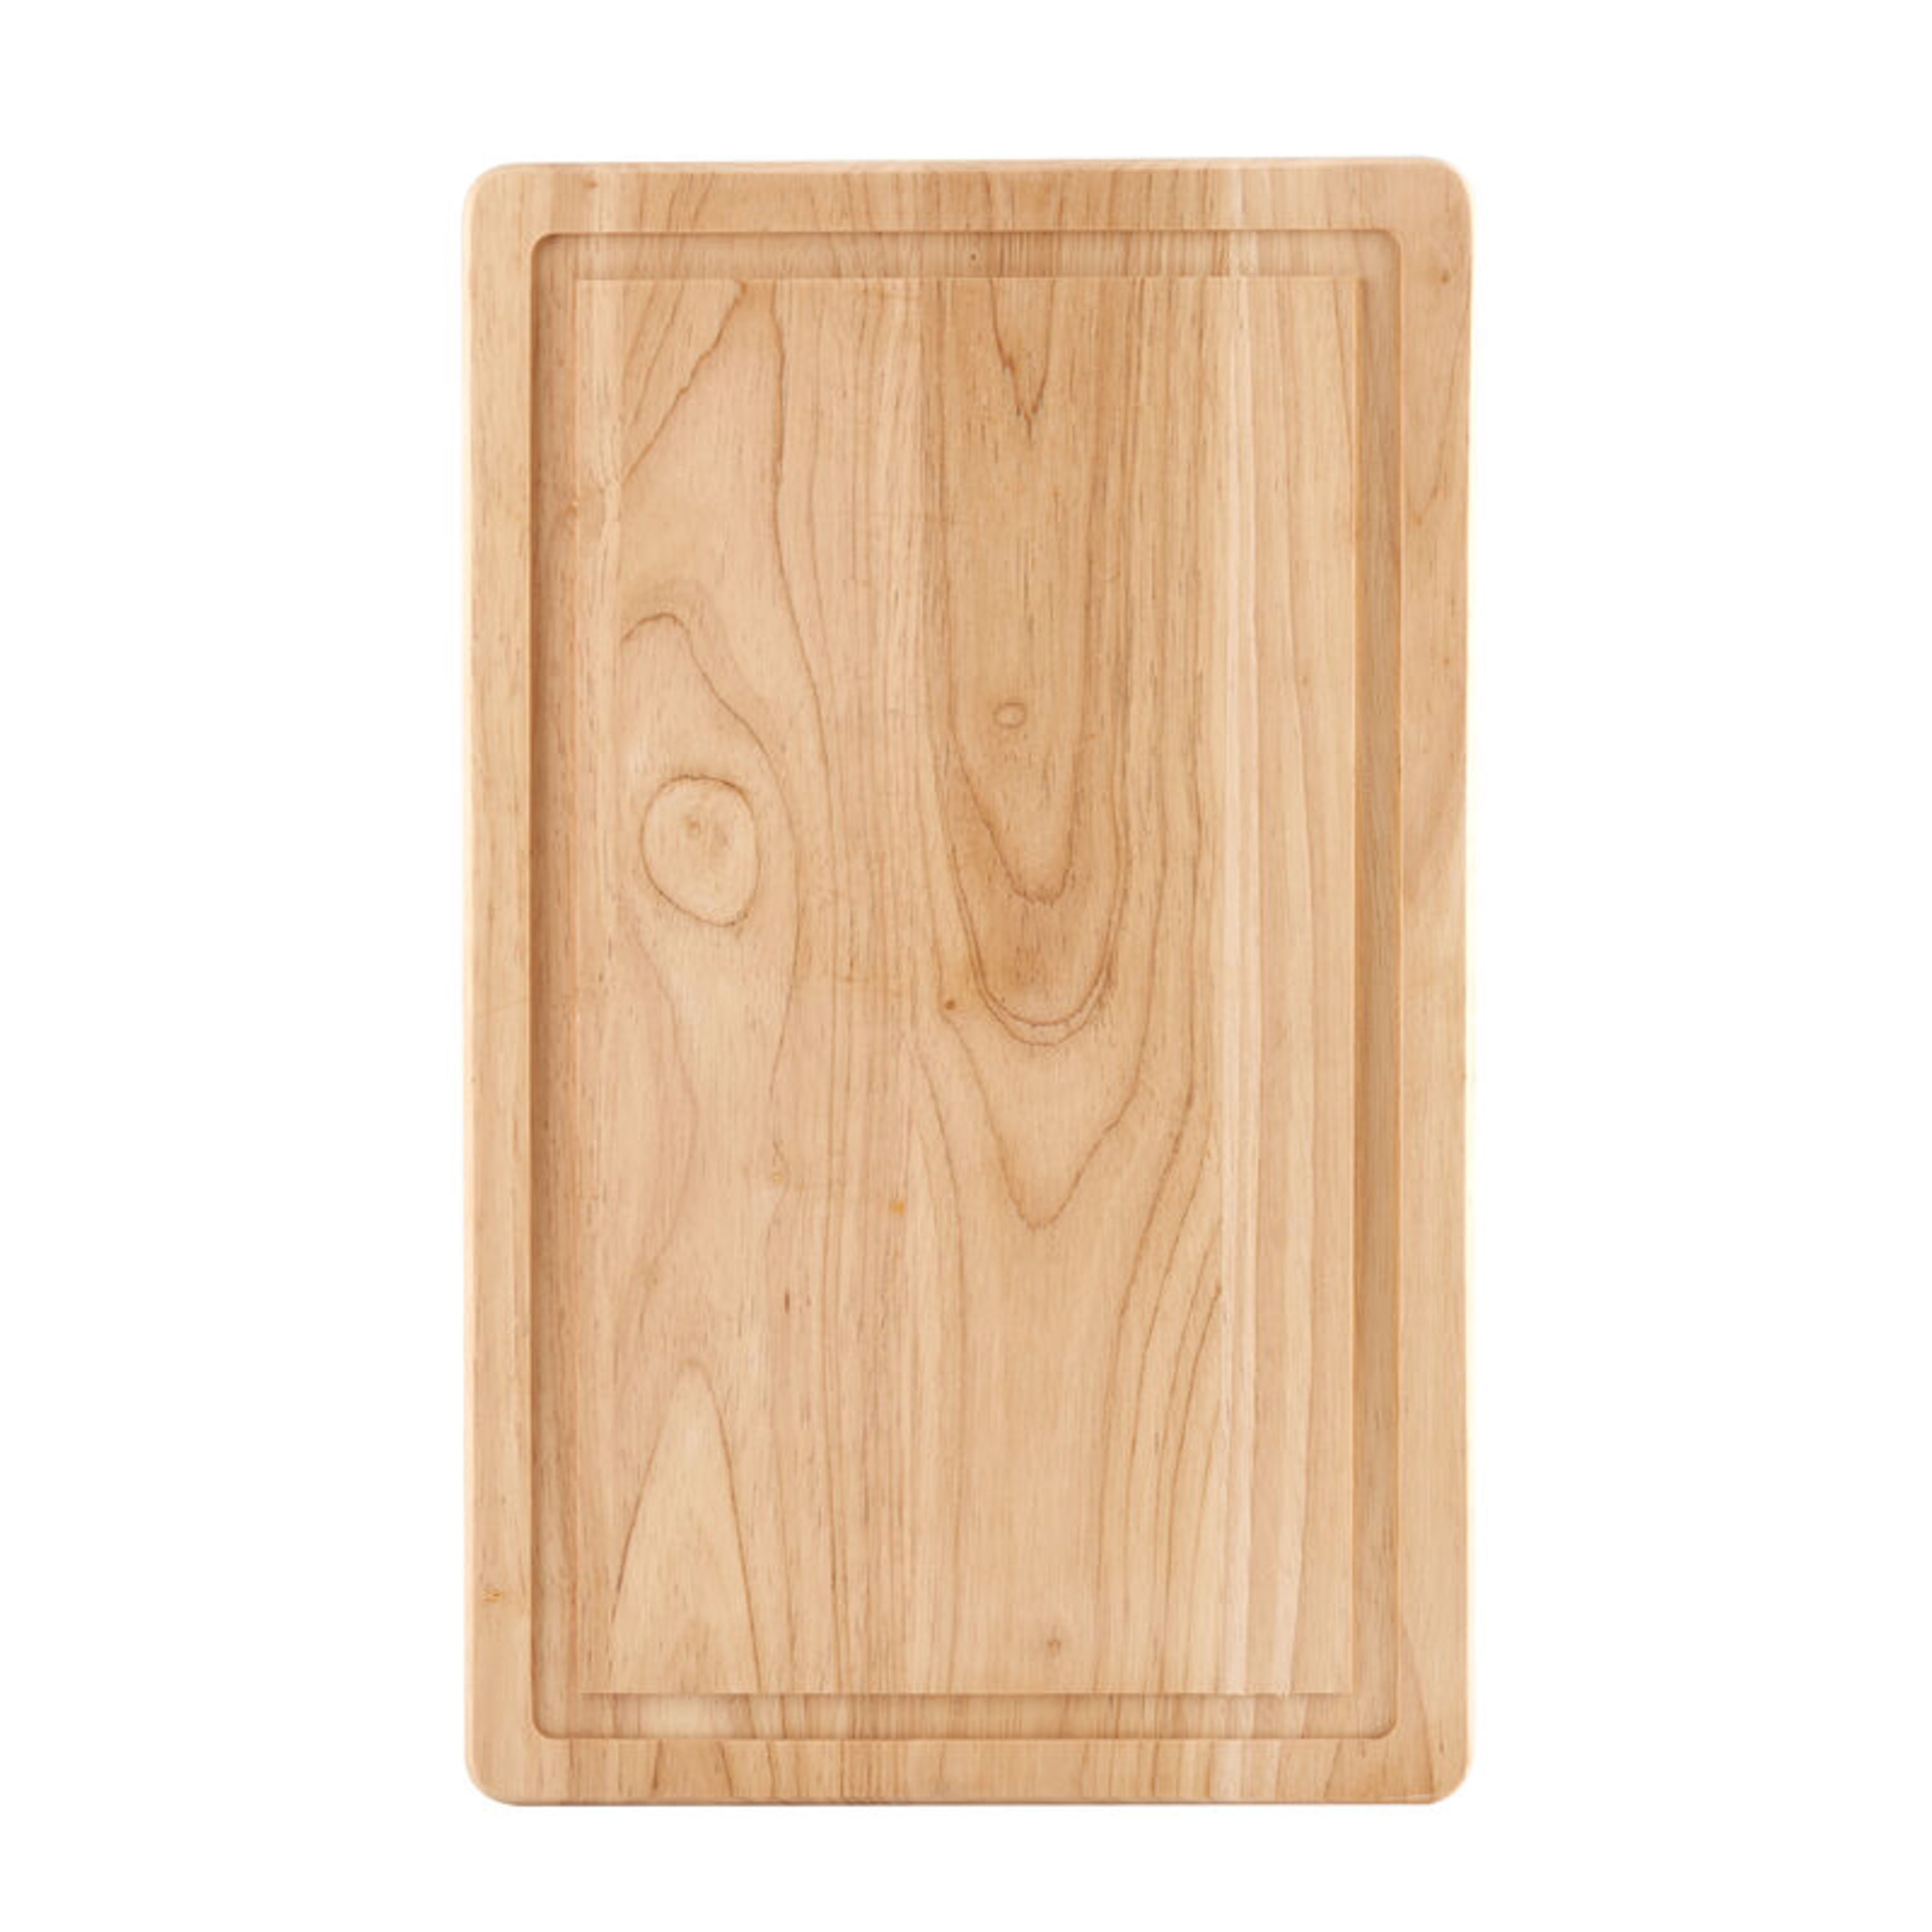 Farberware Rubberwood Cutting Board Set with Juice Grooved and